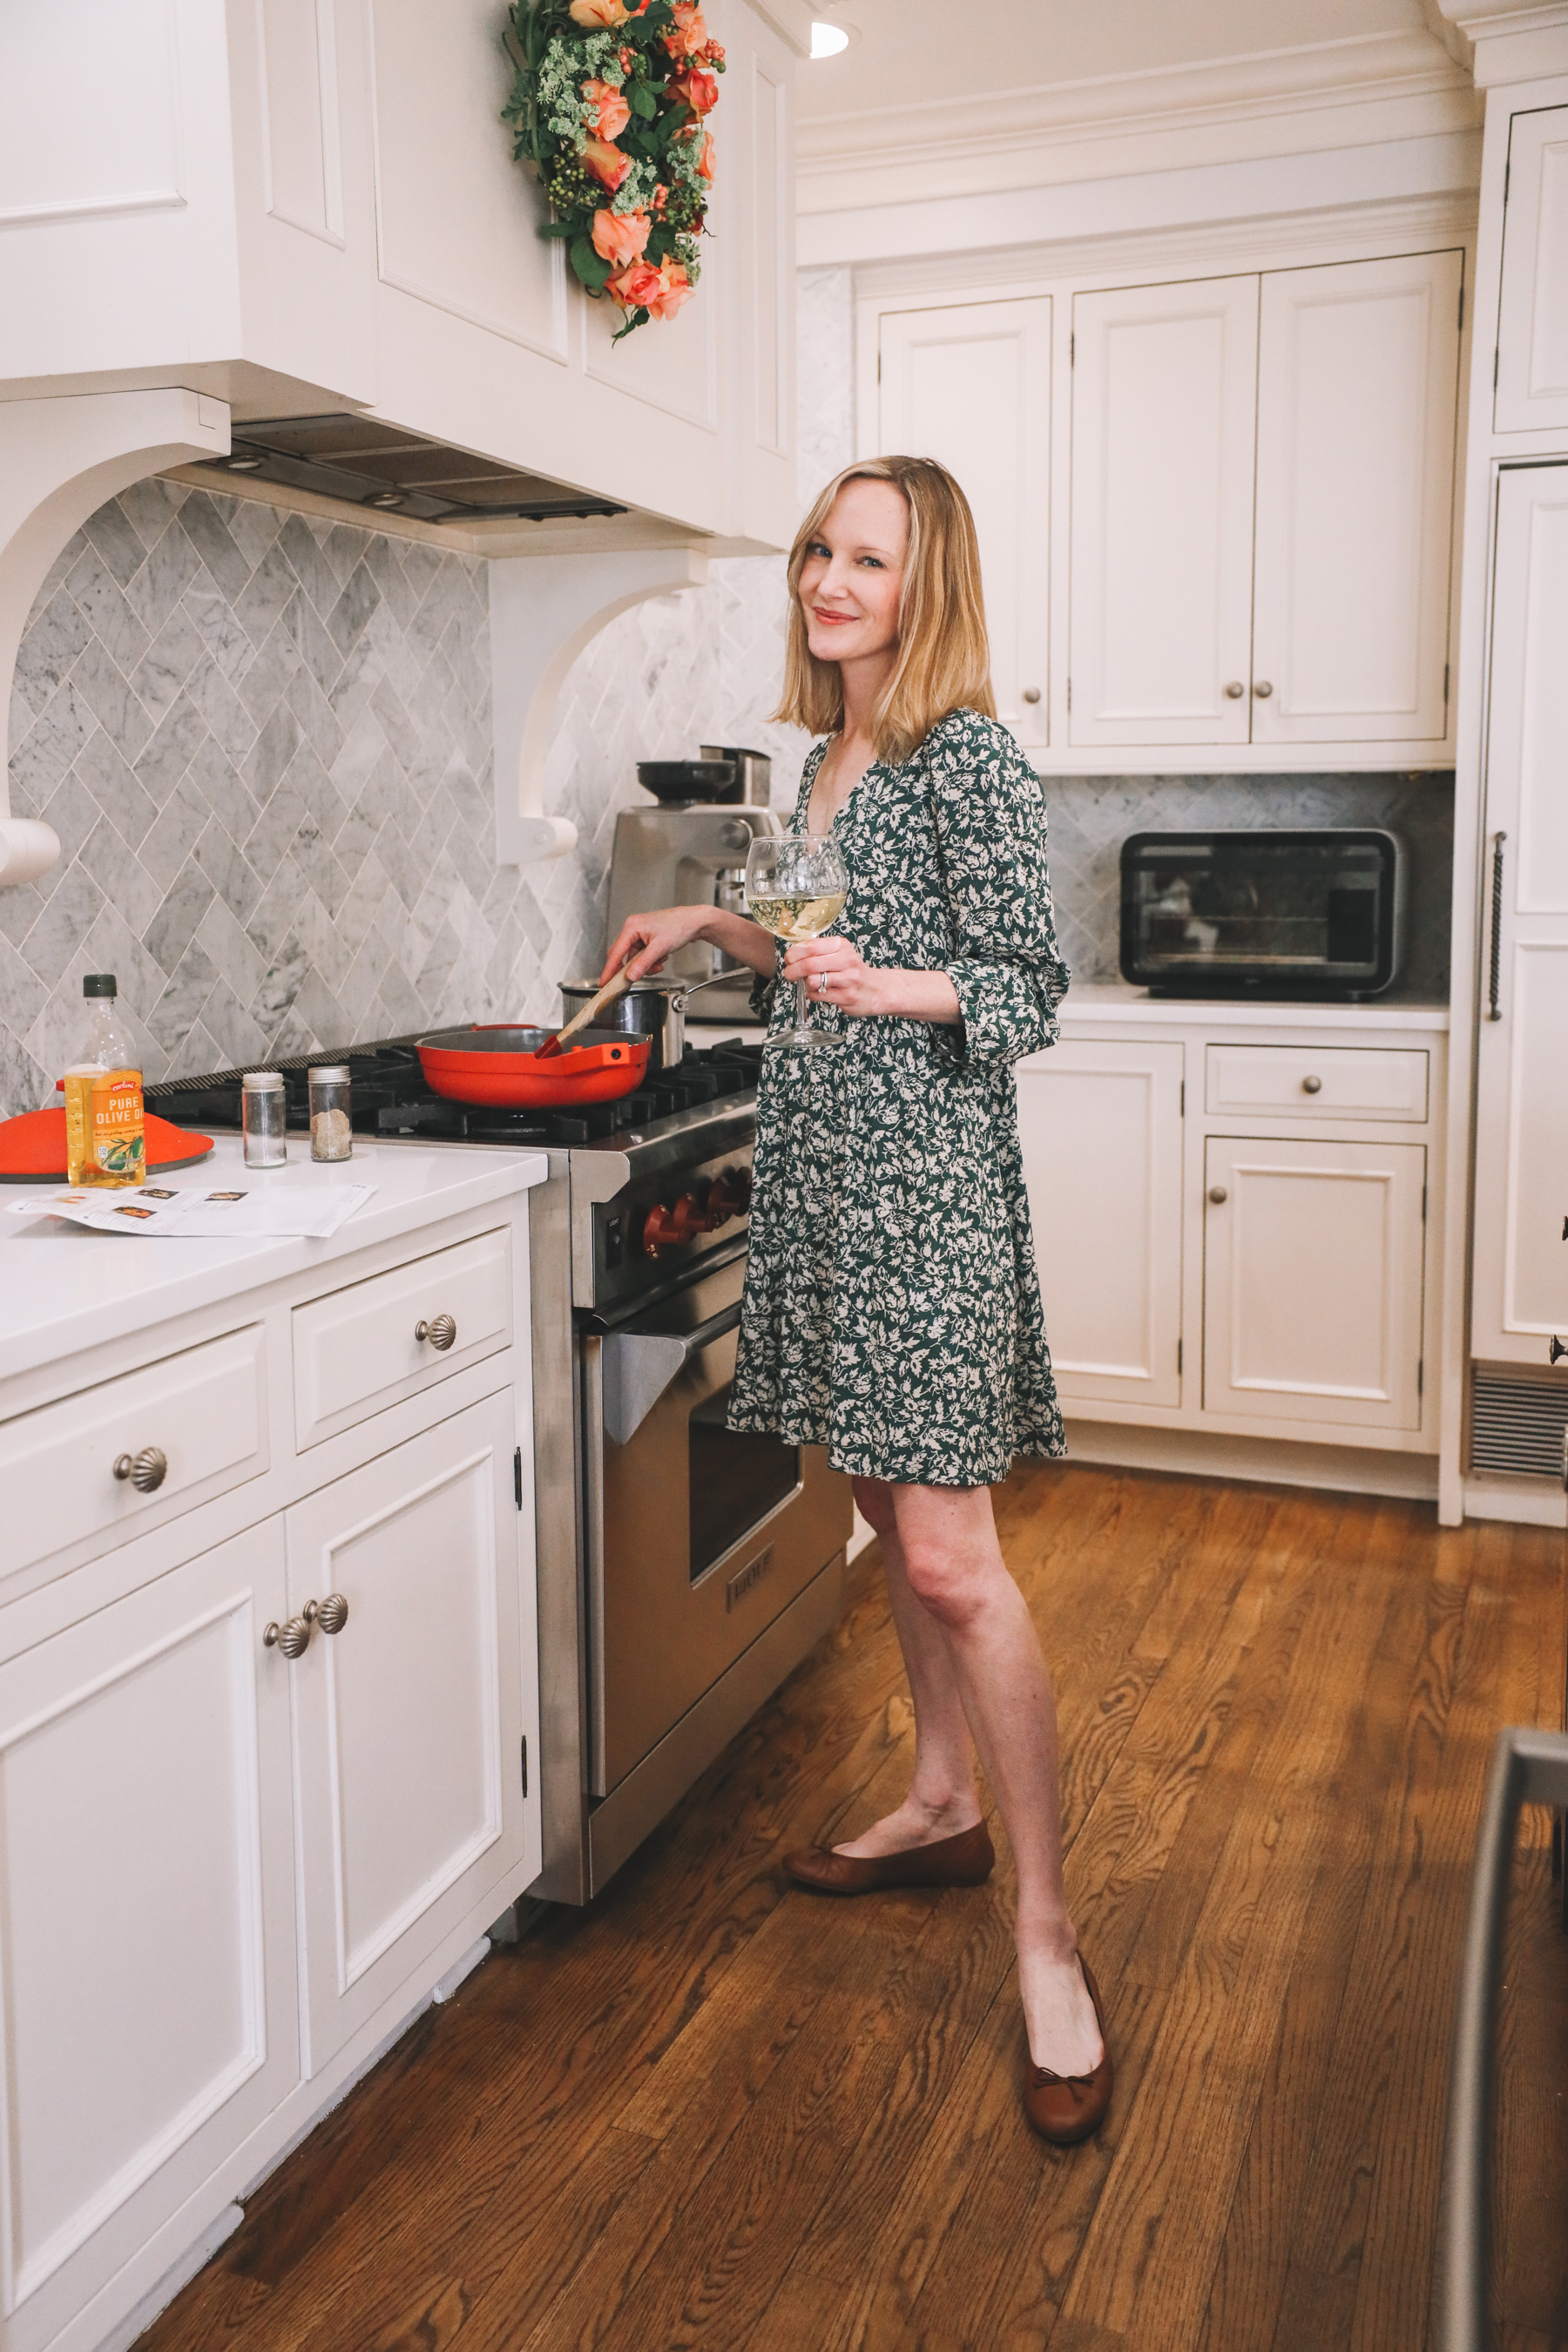 Kelly in the City + Blue Apron Offer